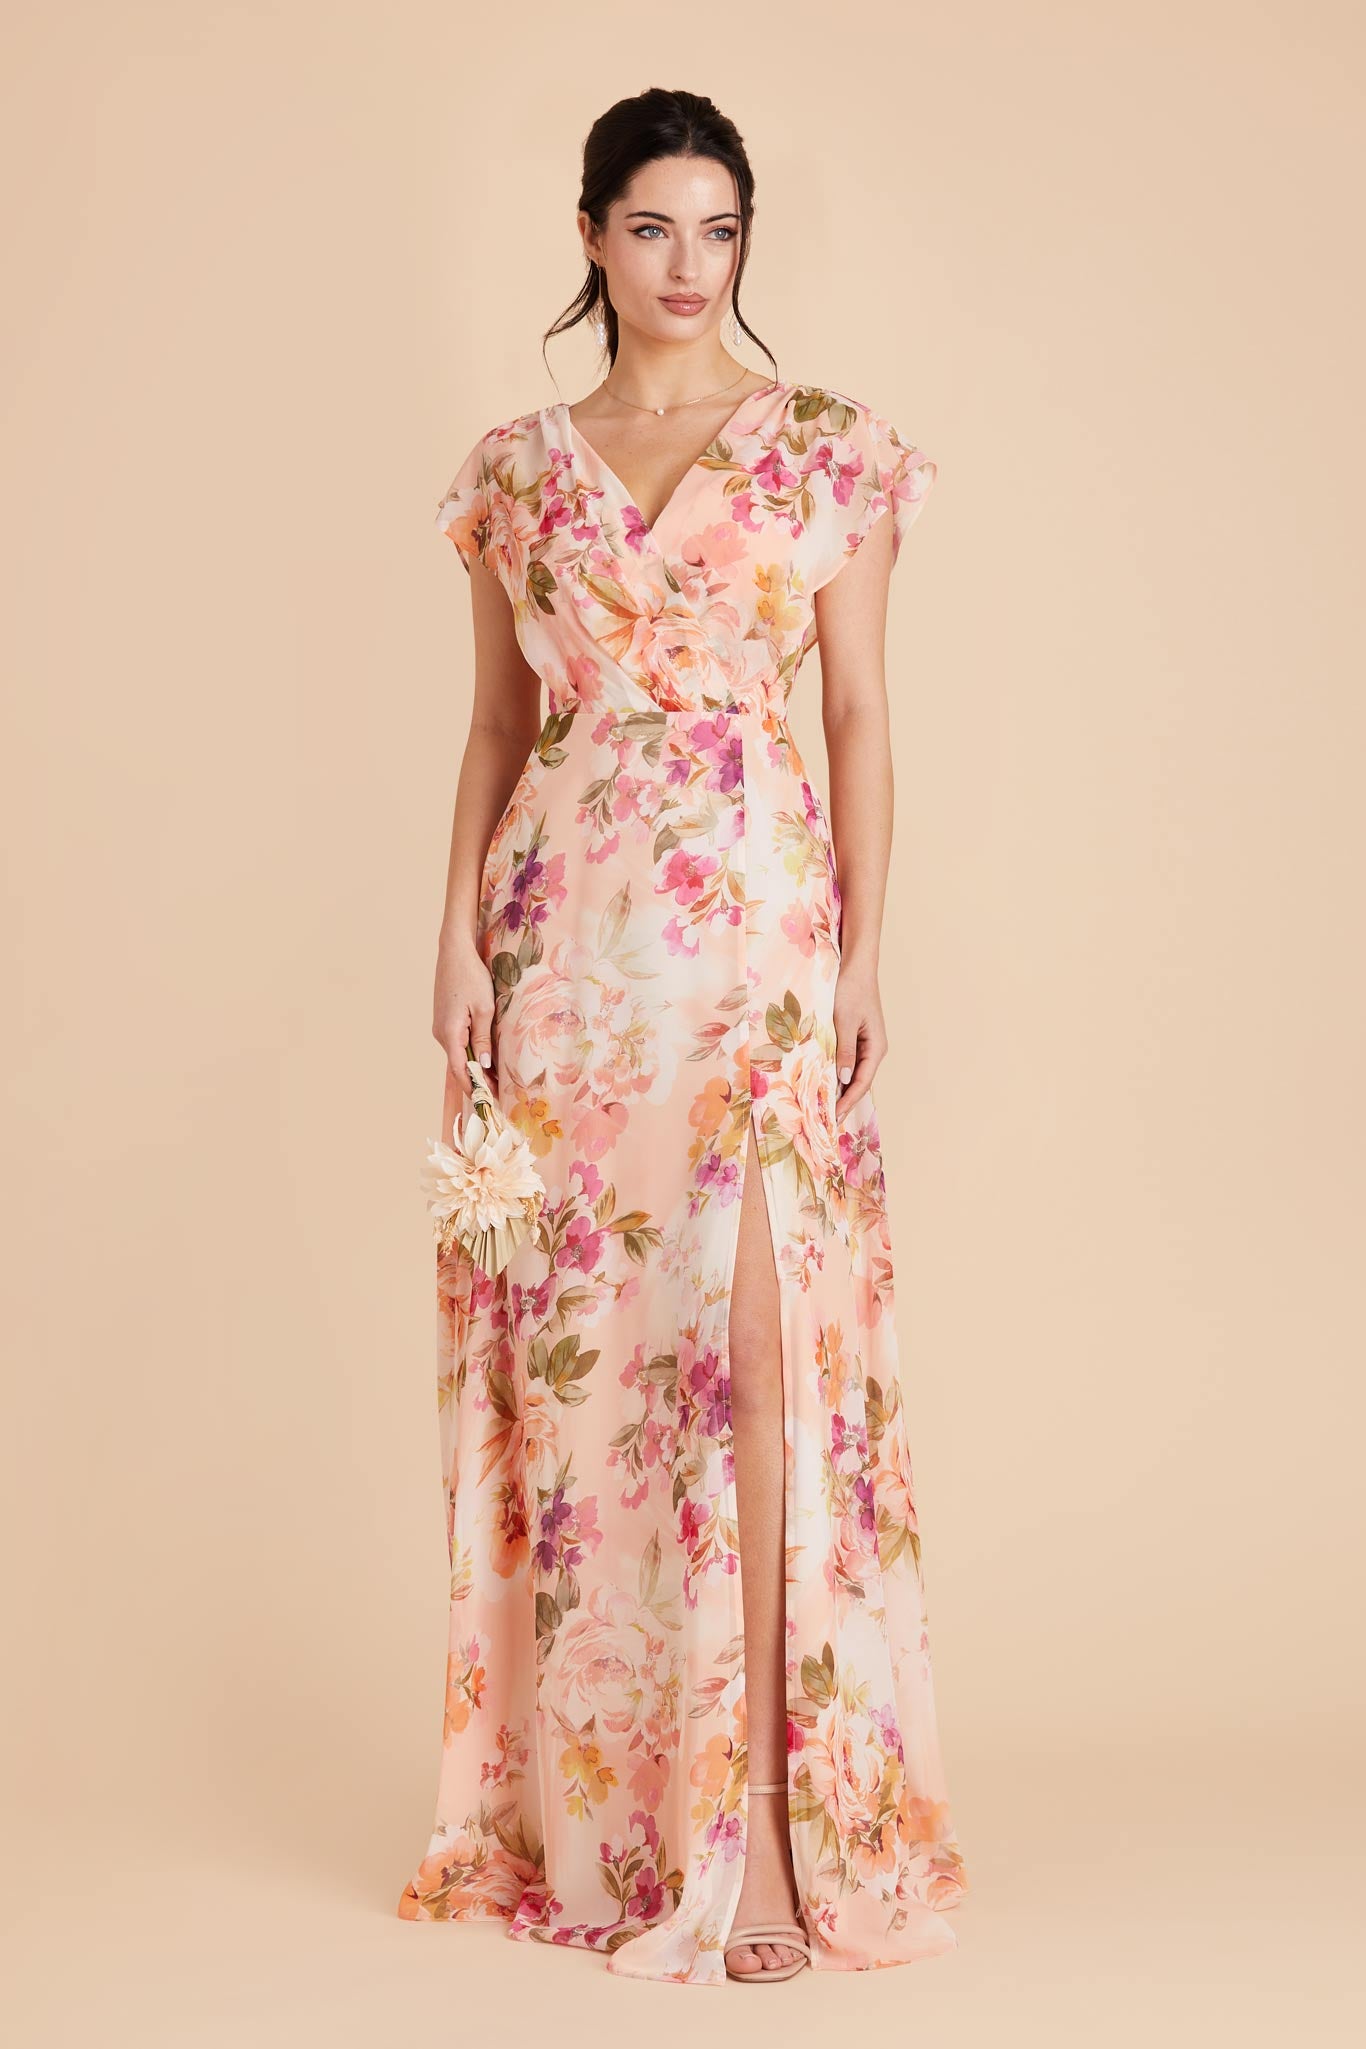 Coral Sunset Peonies Violet Chiffon Dress by Birdy Grey